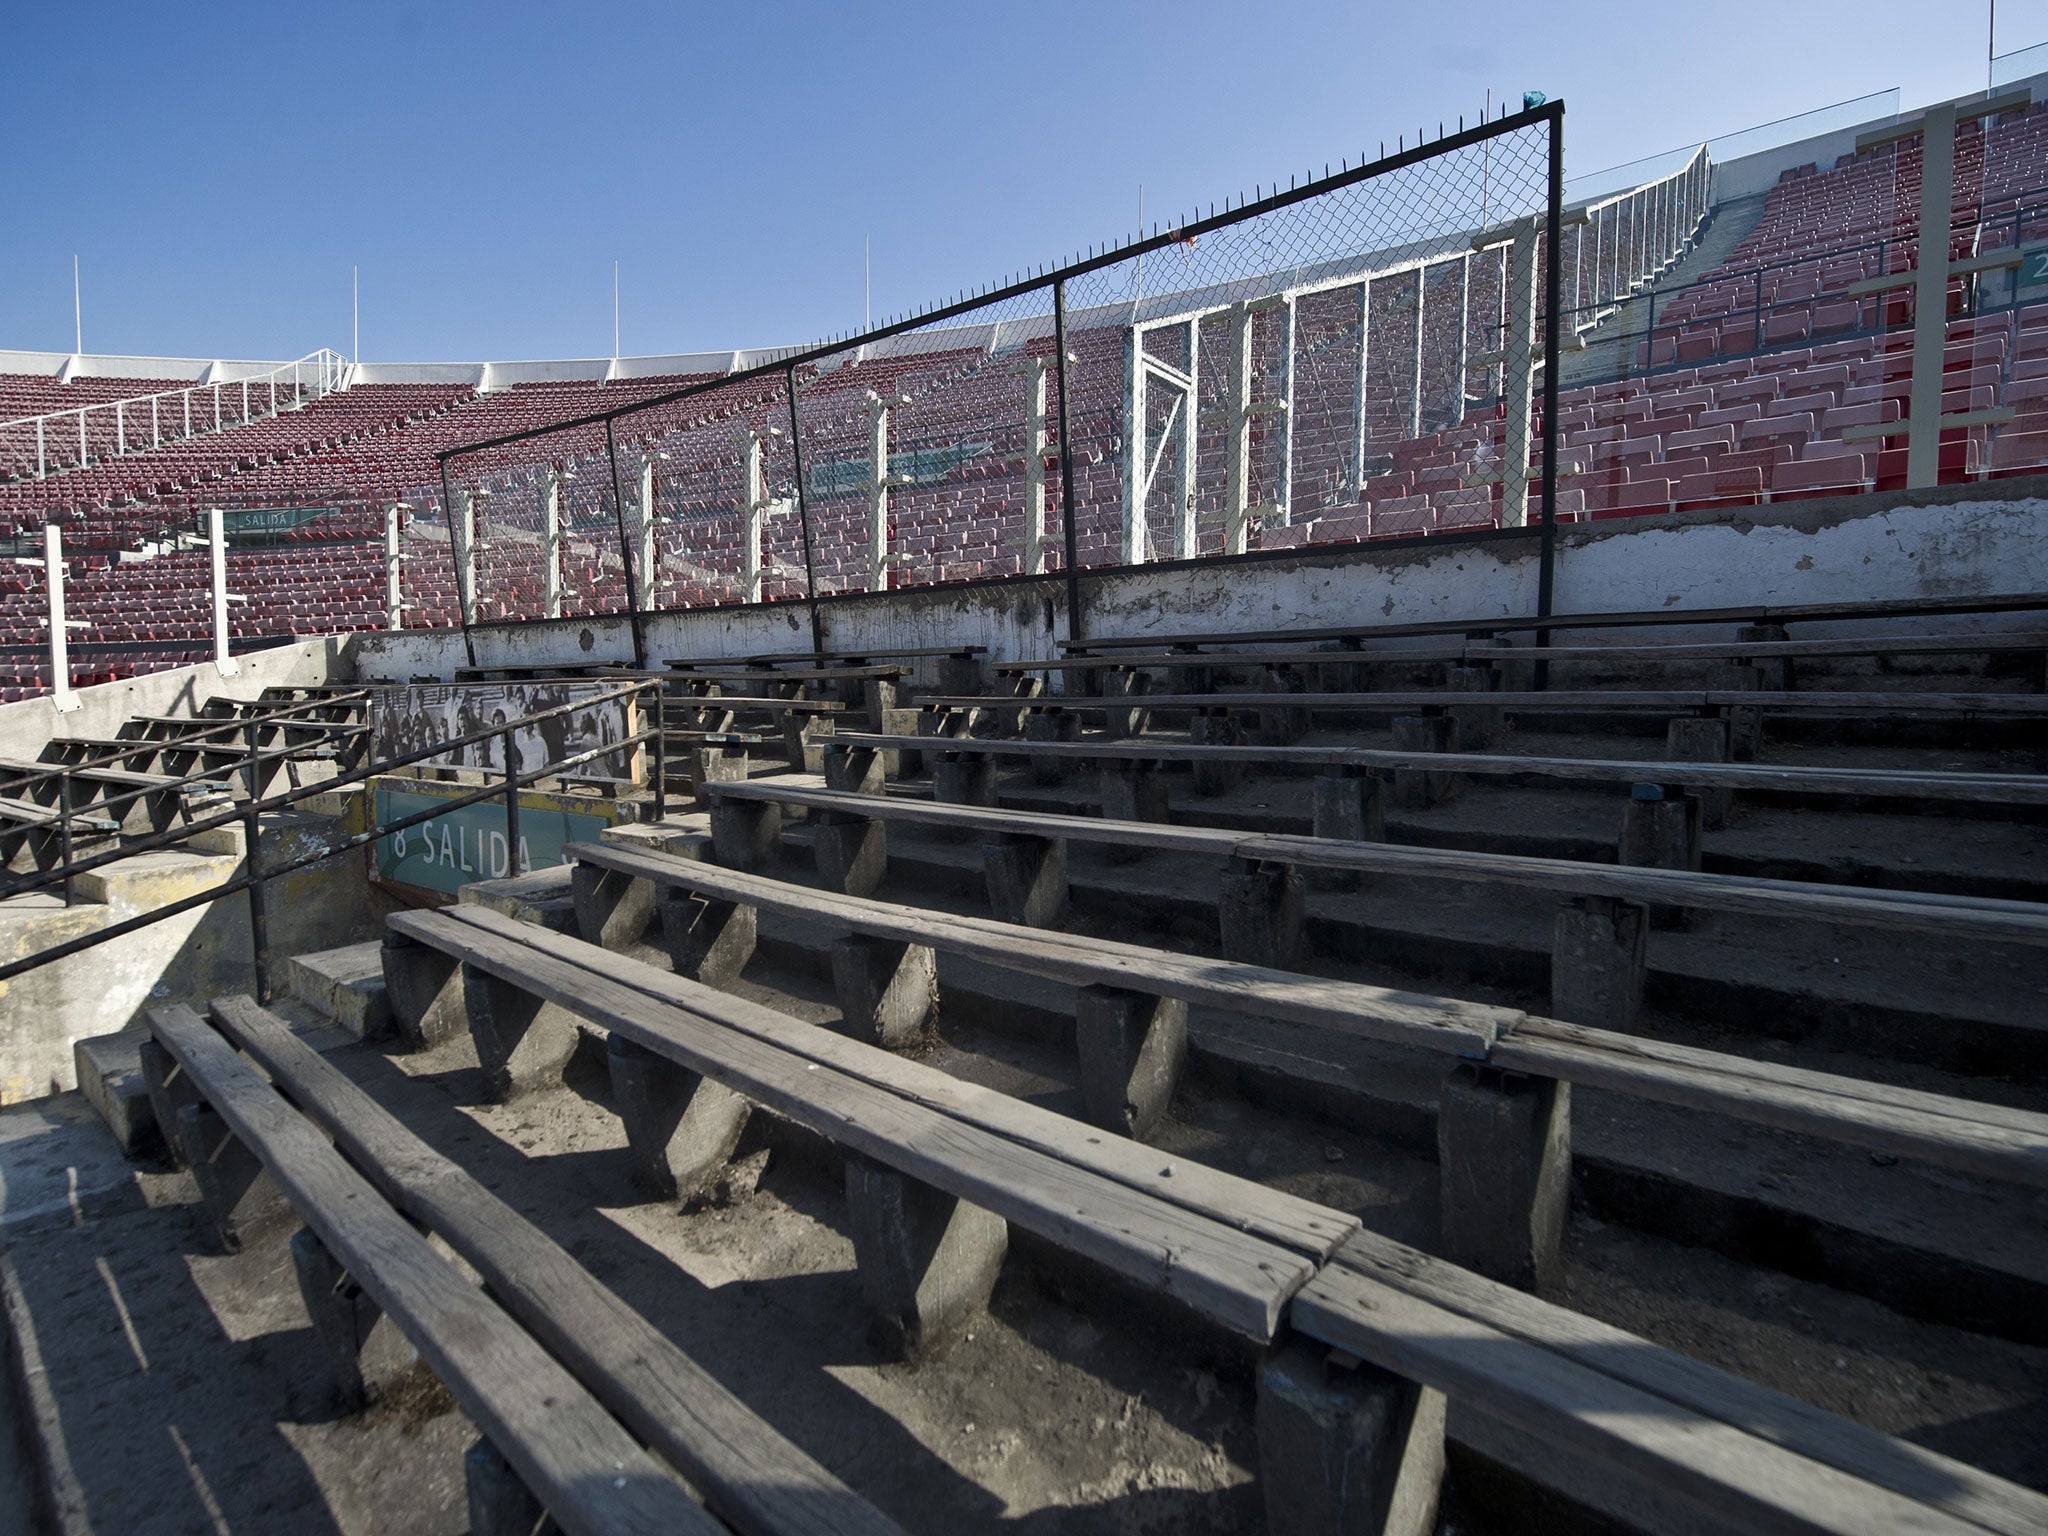 The stadium that, during the dictatorship, was transformed into a detention and torture centre